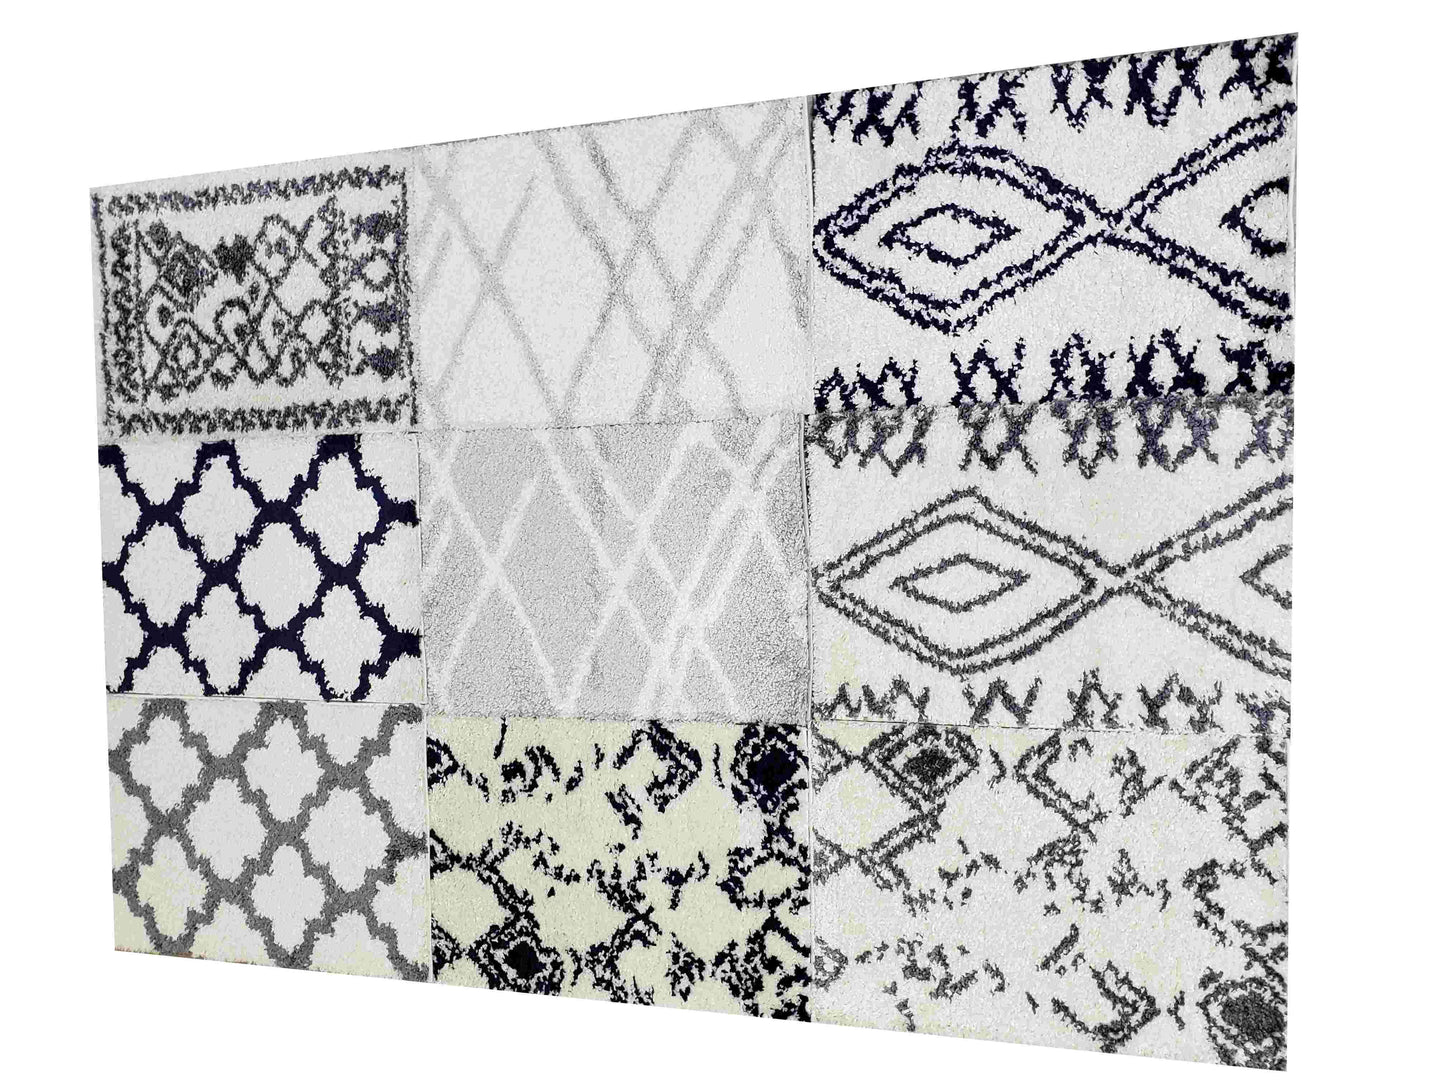 Grant Shaggy Asilah Abstract Modern Abstract Turkish Indoor Small Mat Doormat Rug in Dark Gray White